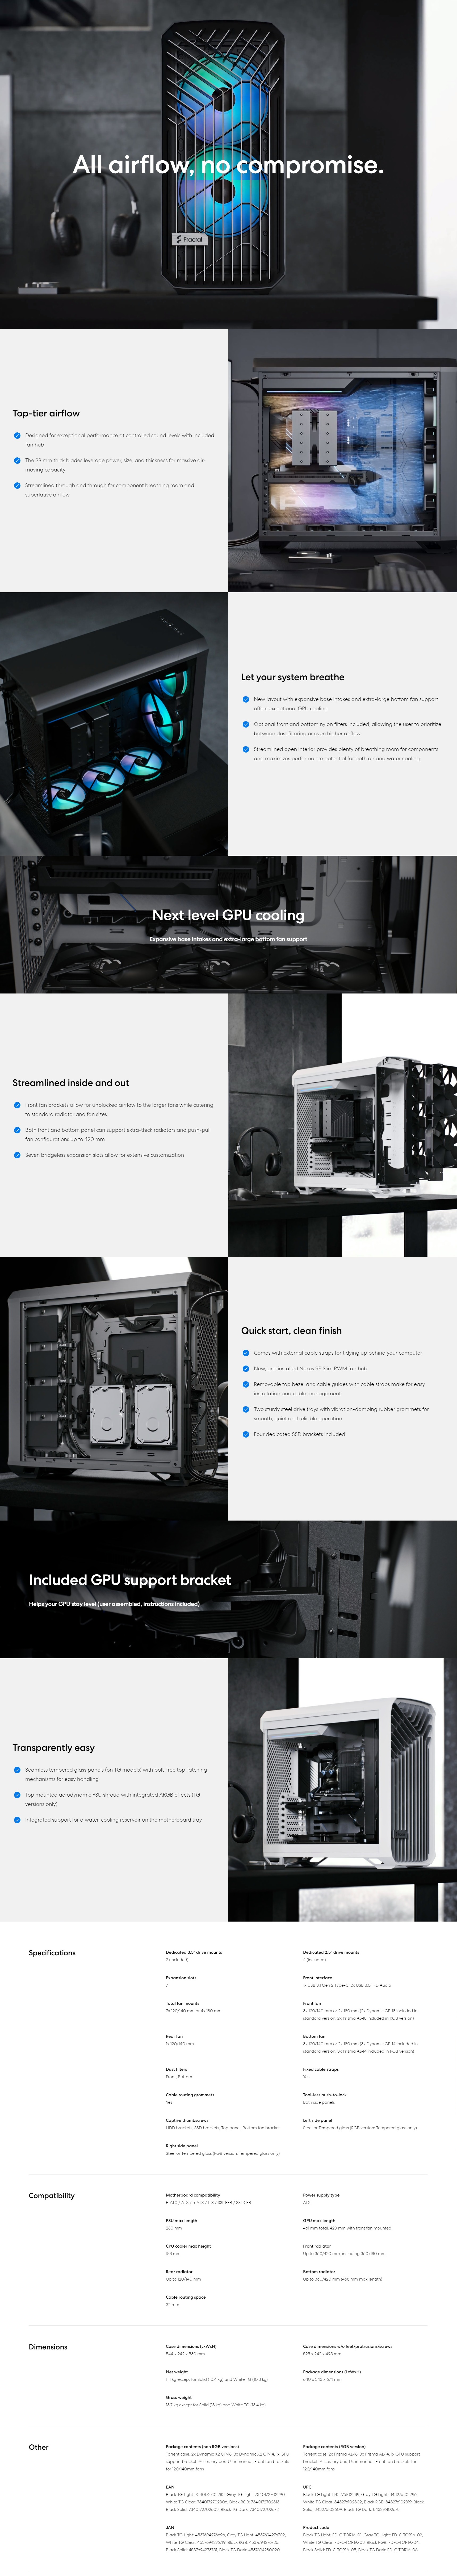 A large marketing image providing additional information about the product Fractal Design Torrent TG Light Tint Mid Tower Case - Grey - Additional alt info not provided